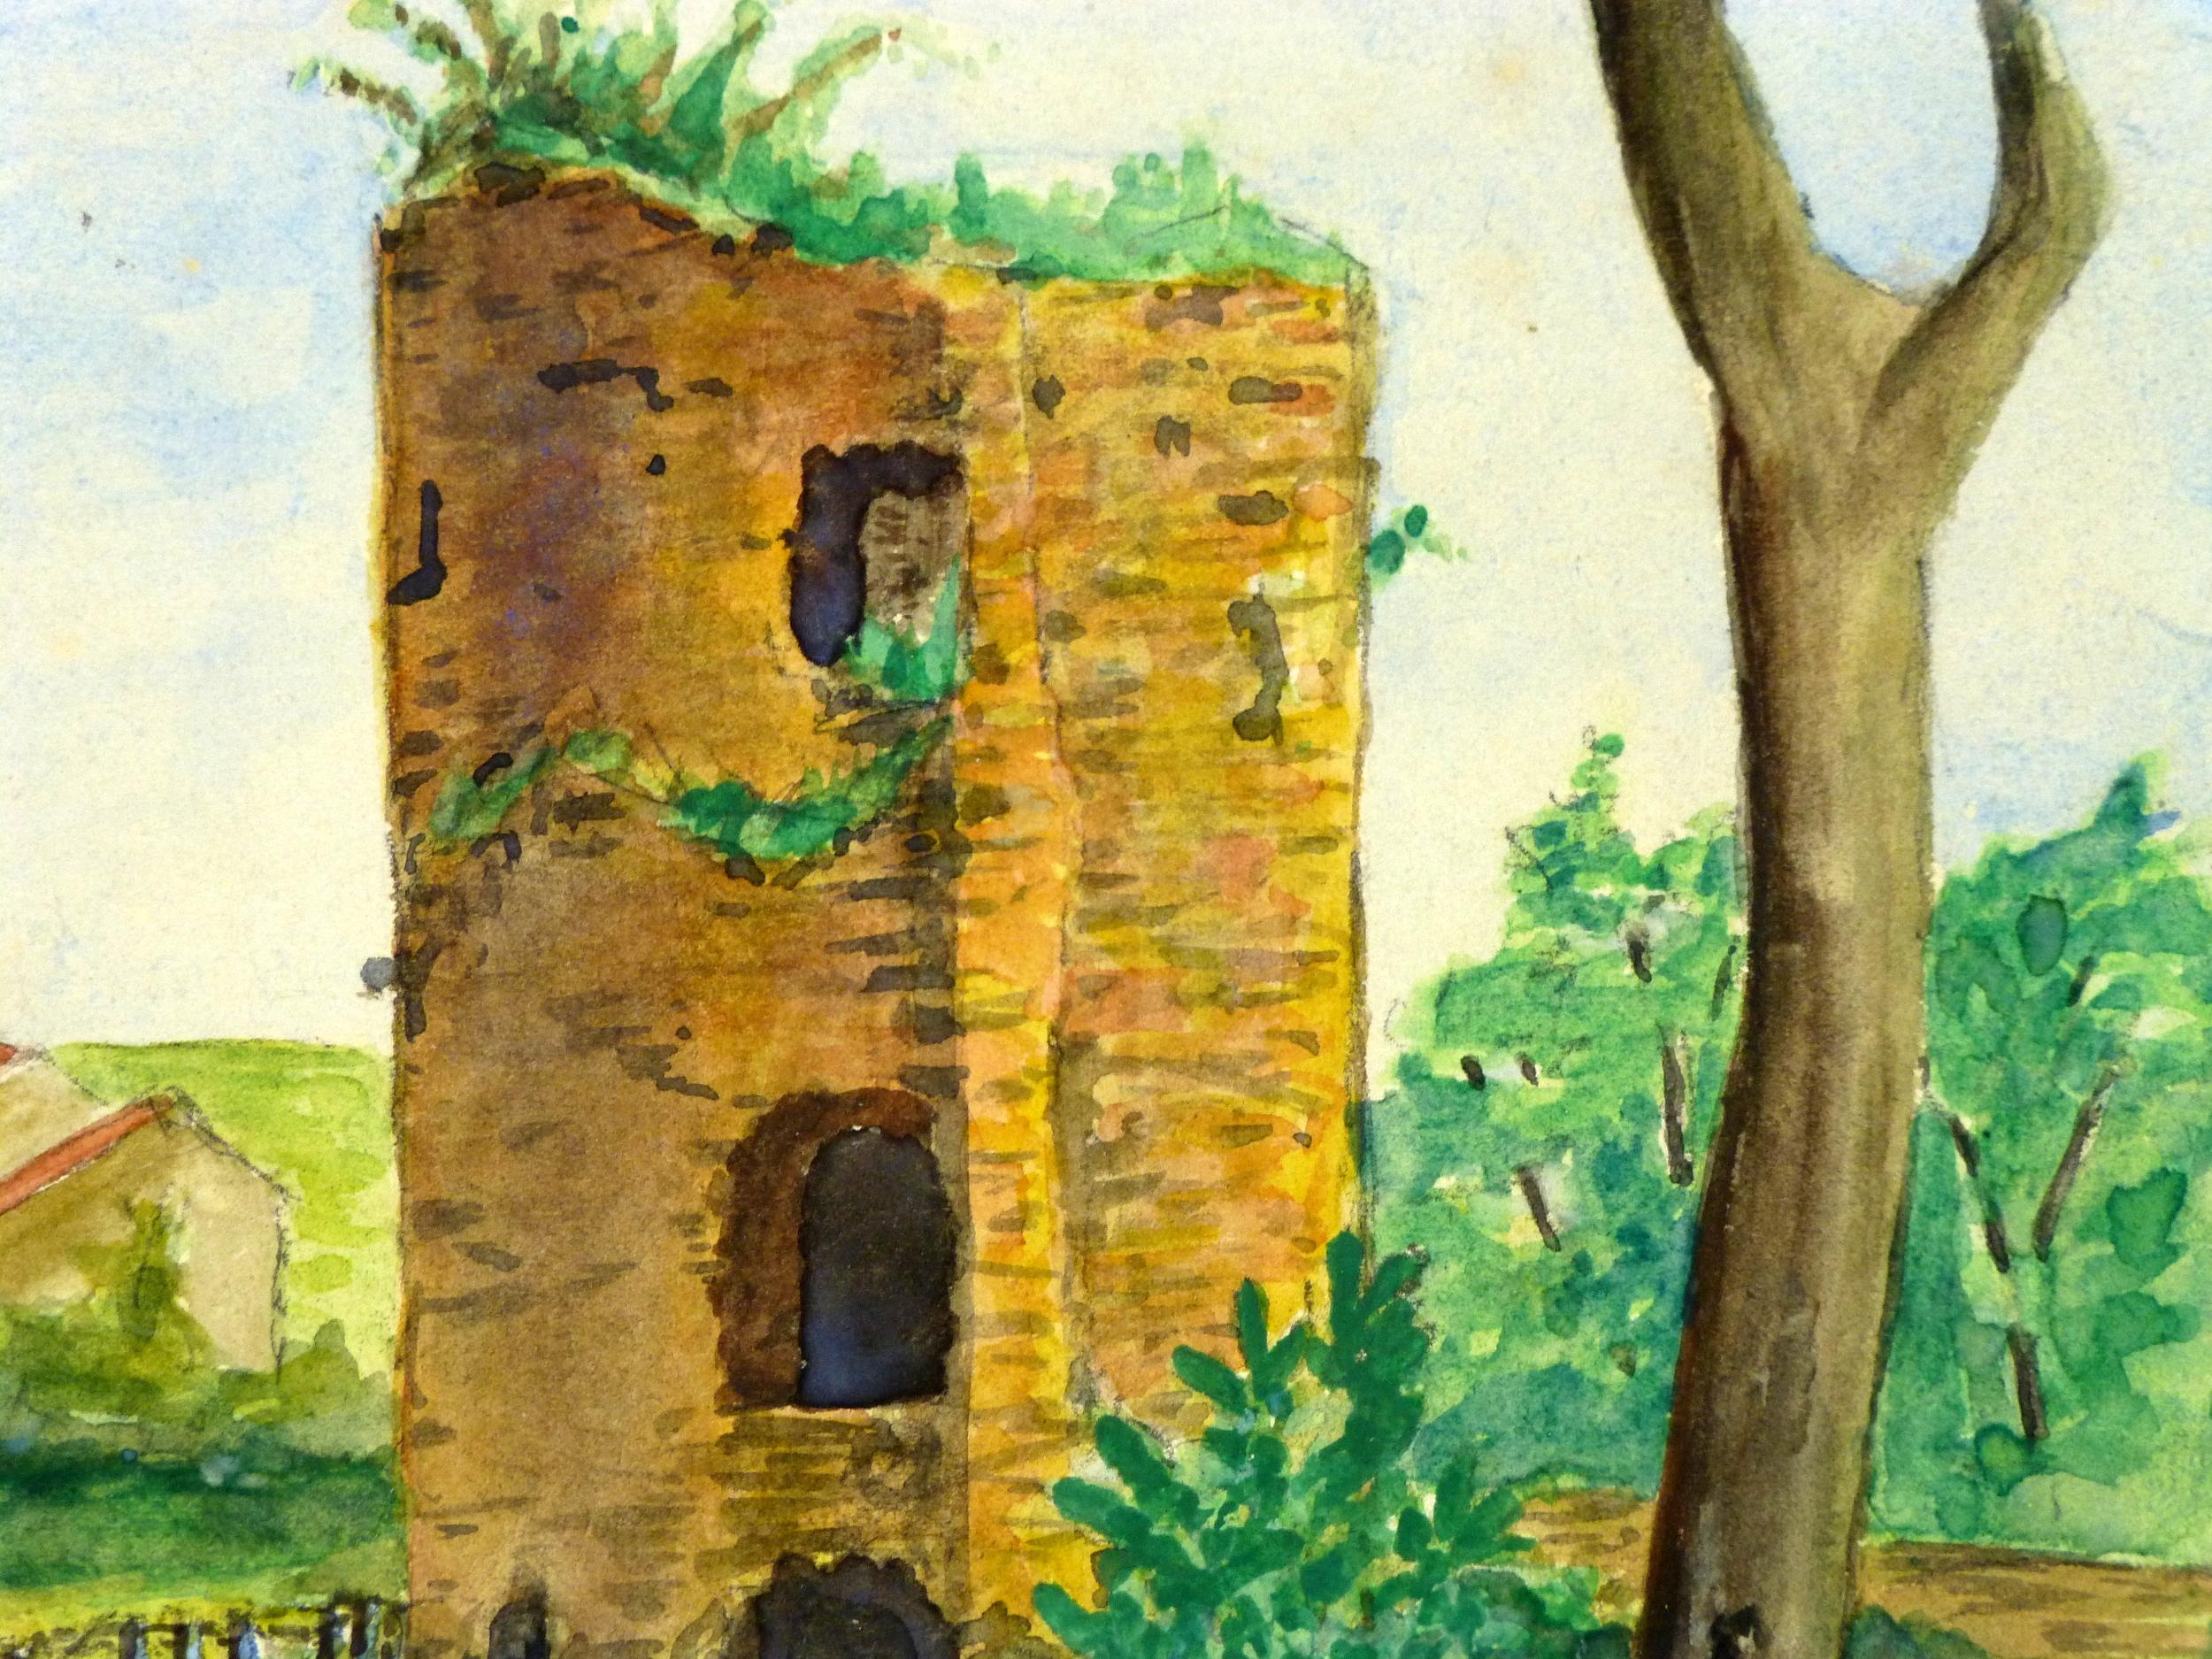 French Landscape - Overgrown Tower in Lush Green field under Cloudy Blue Sky - Painting by Unknown